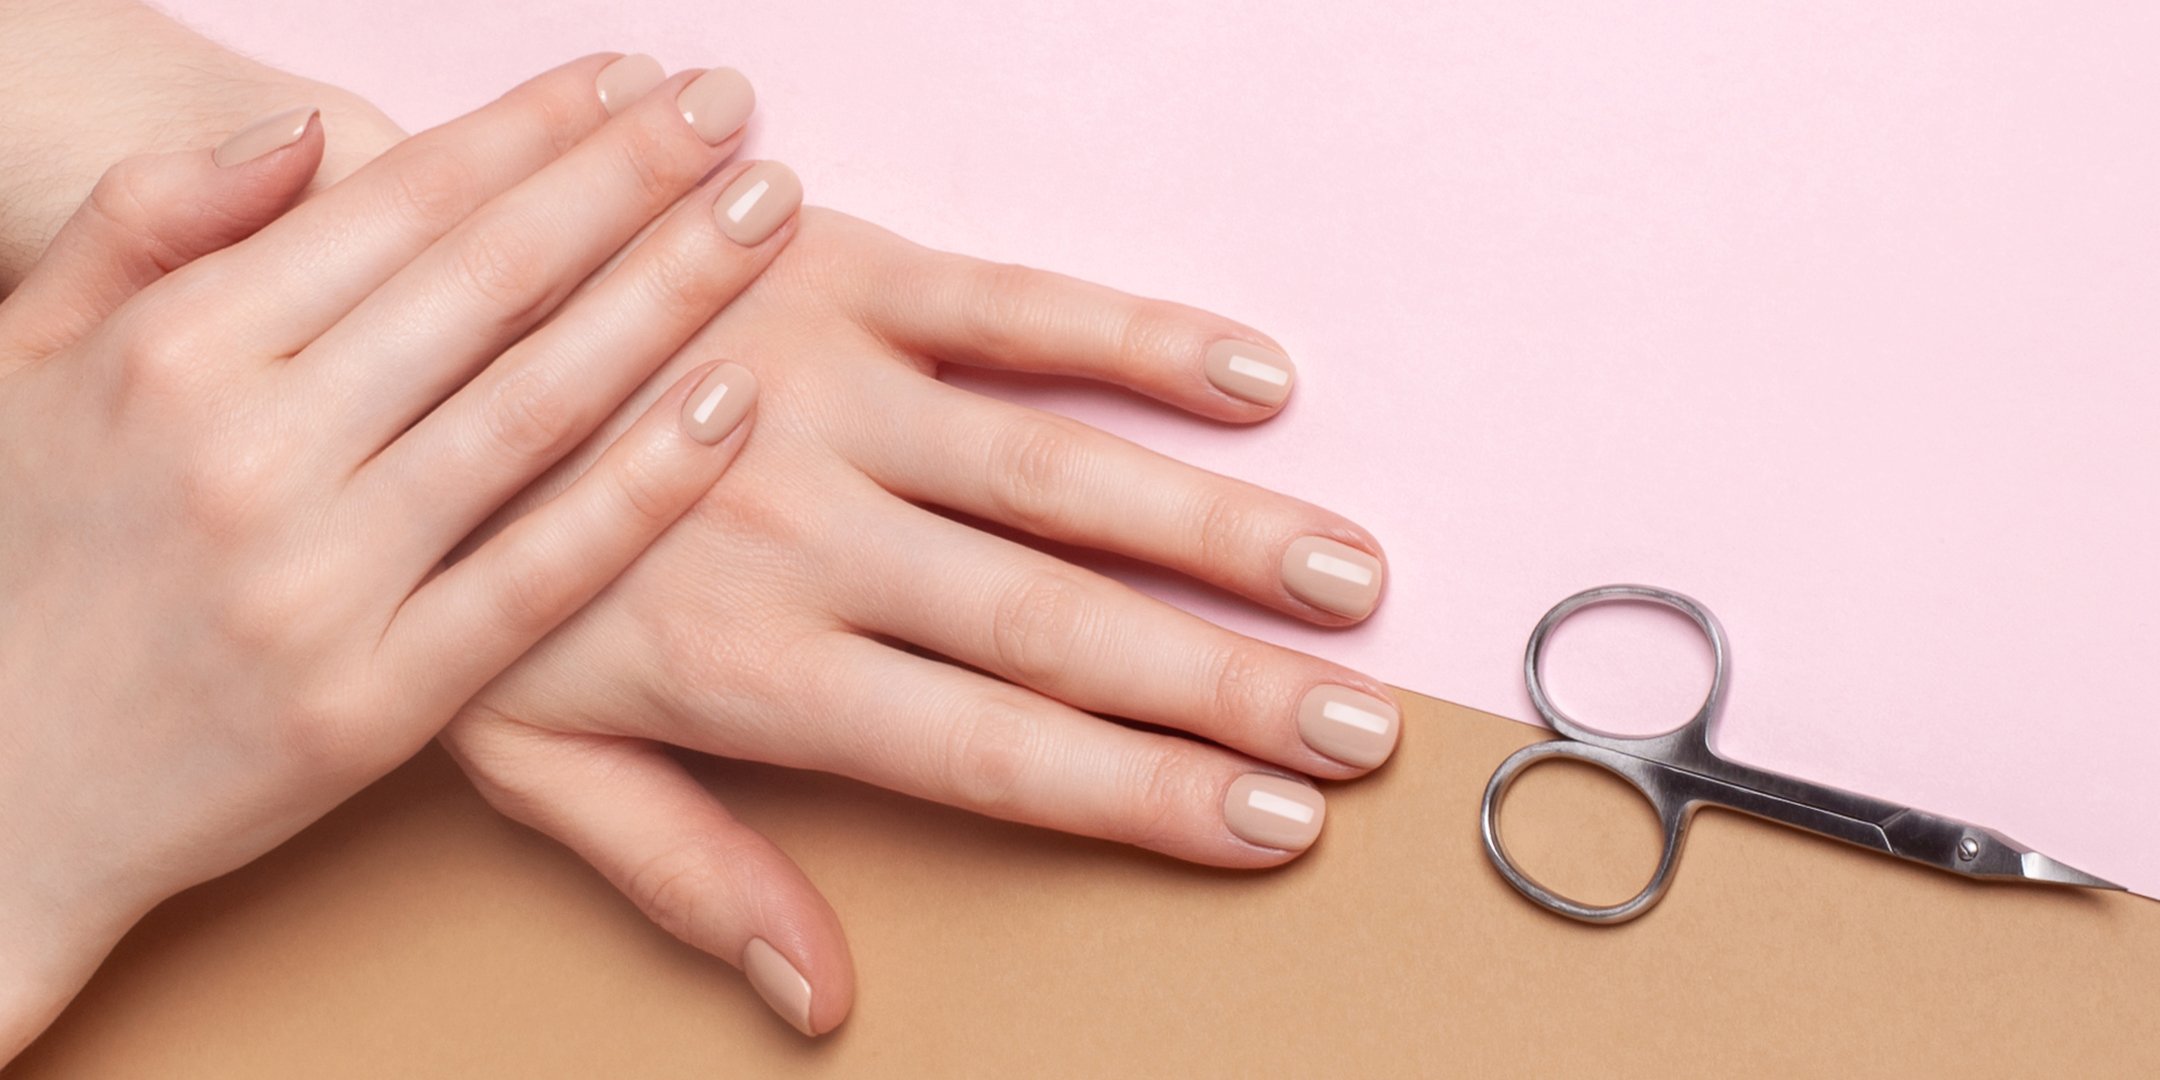 Nails_Which-Service-matches-my-client_header_2160x1080